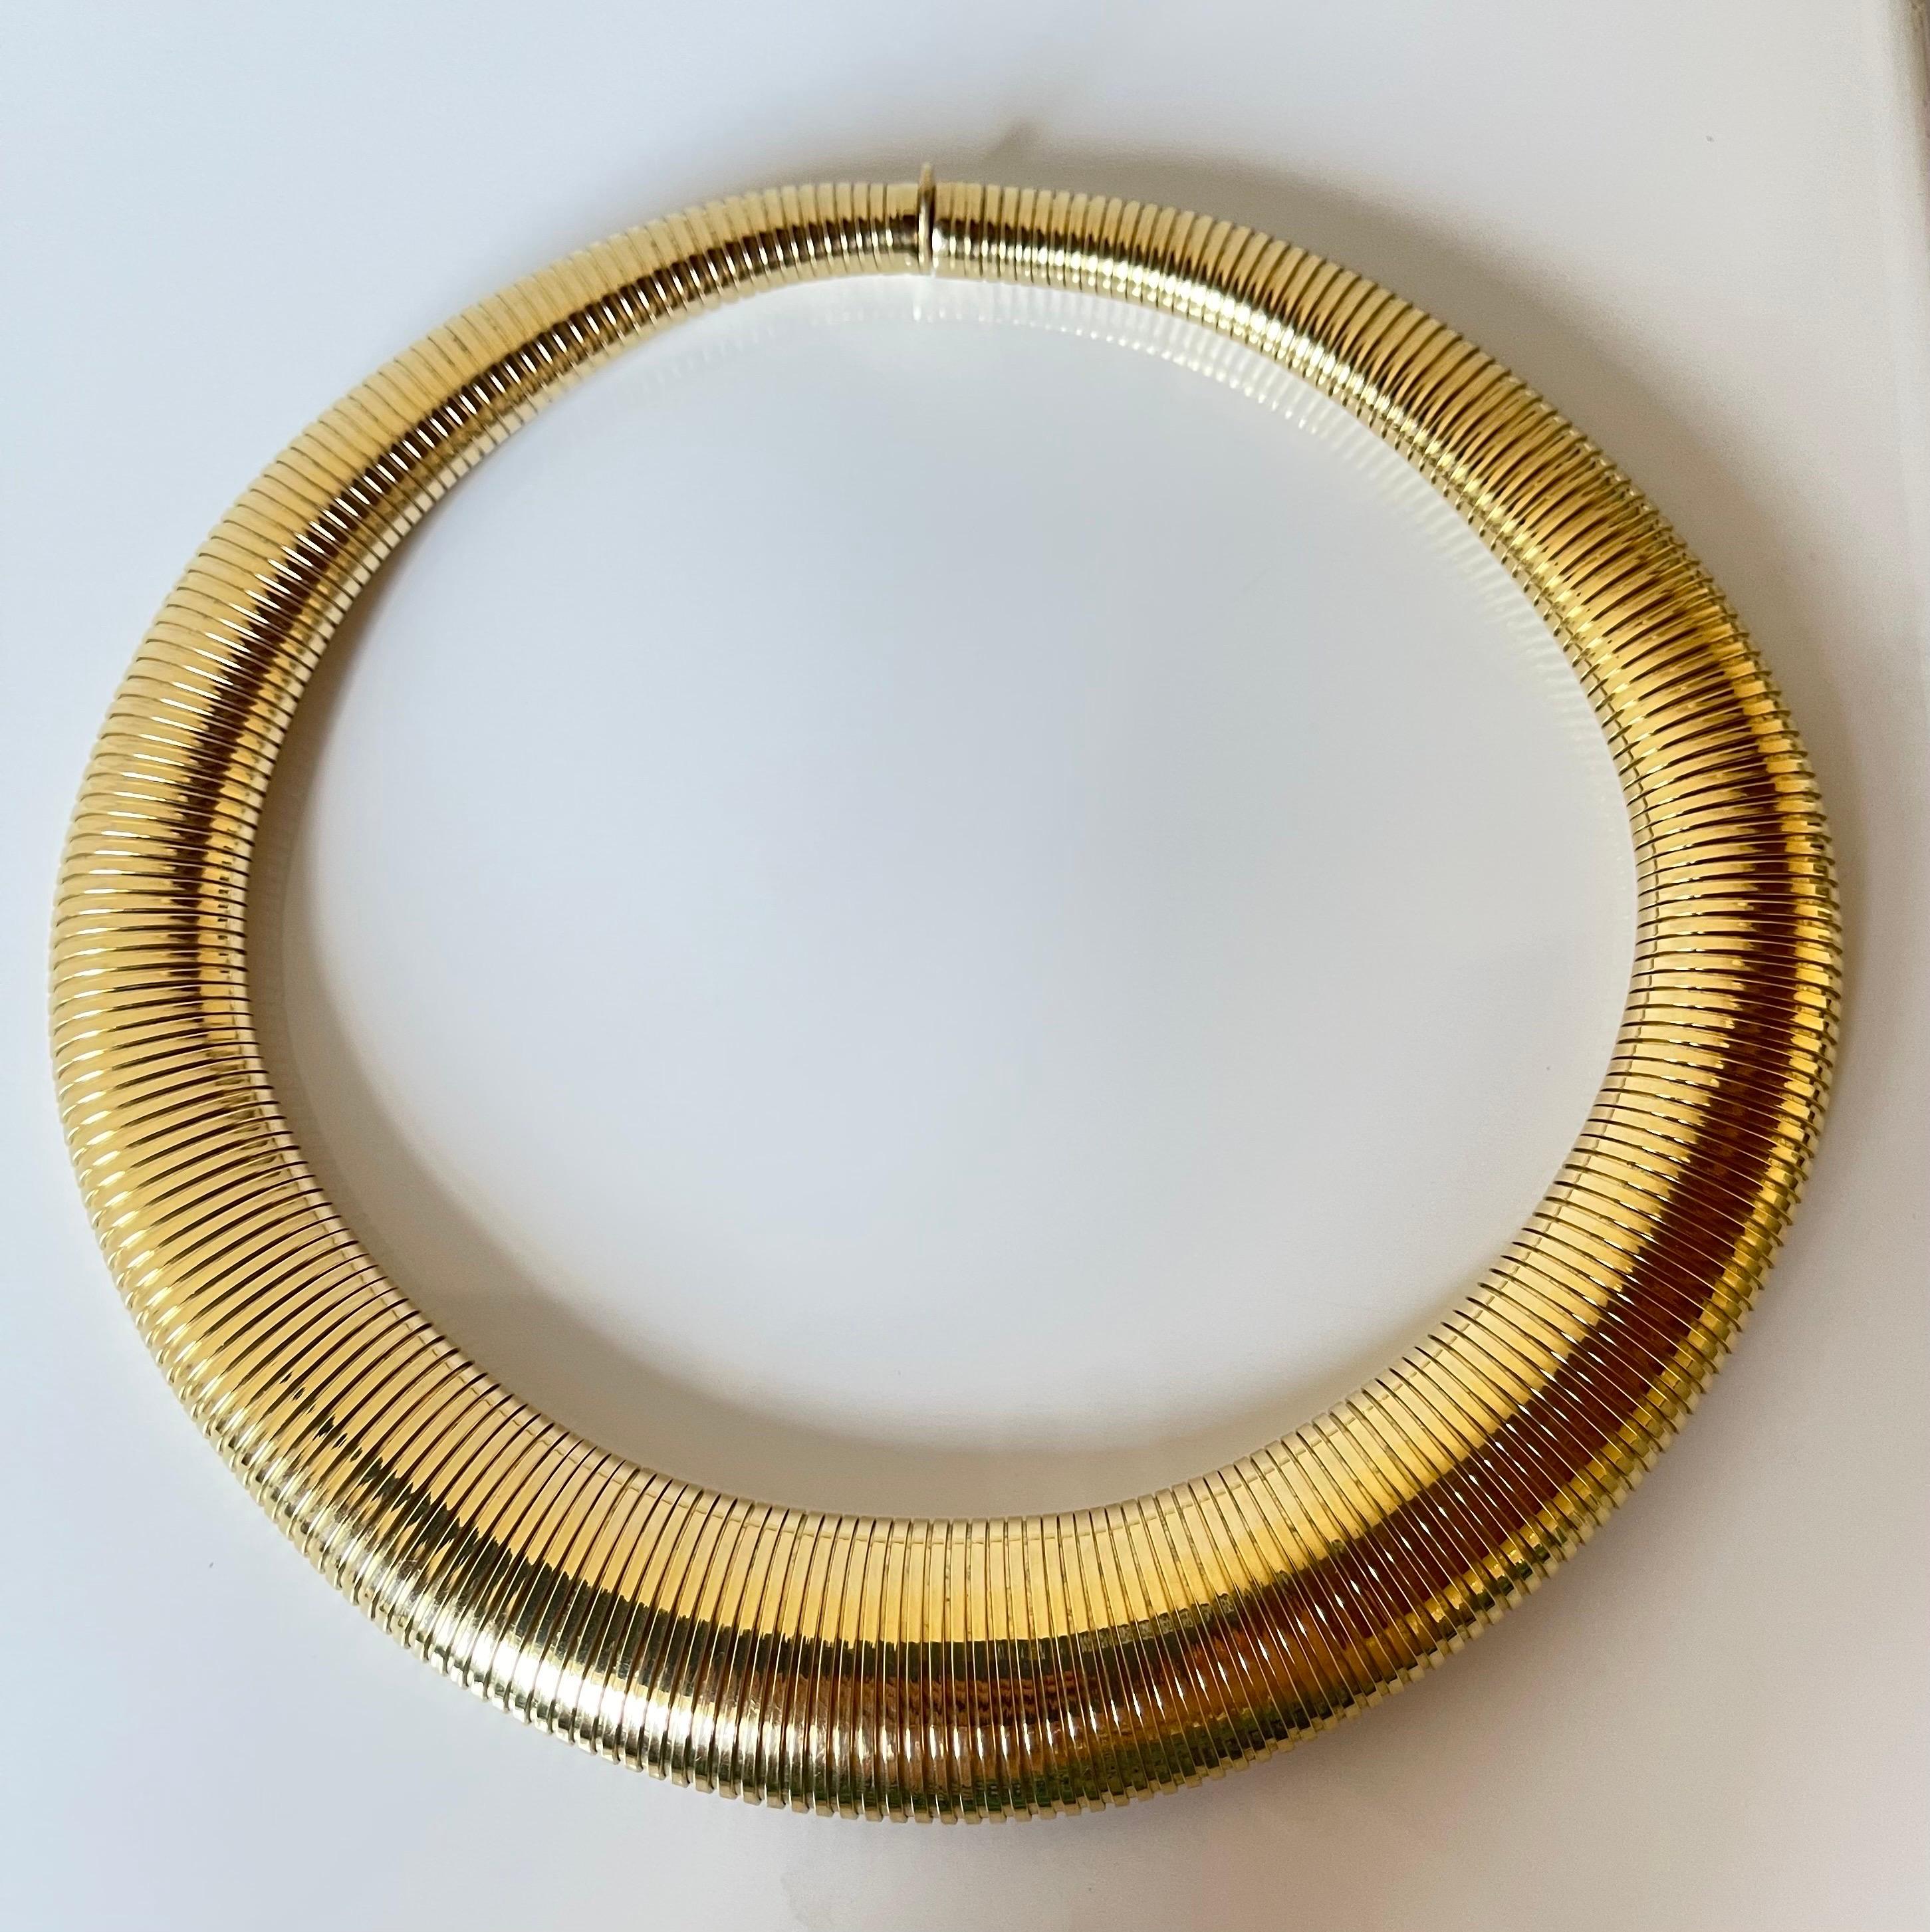 A big domed 18K yellow gold Tubogas necklace made in Vicenza, Italy, in the 1970's. This necklace is 53 cm (20.8